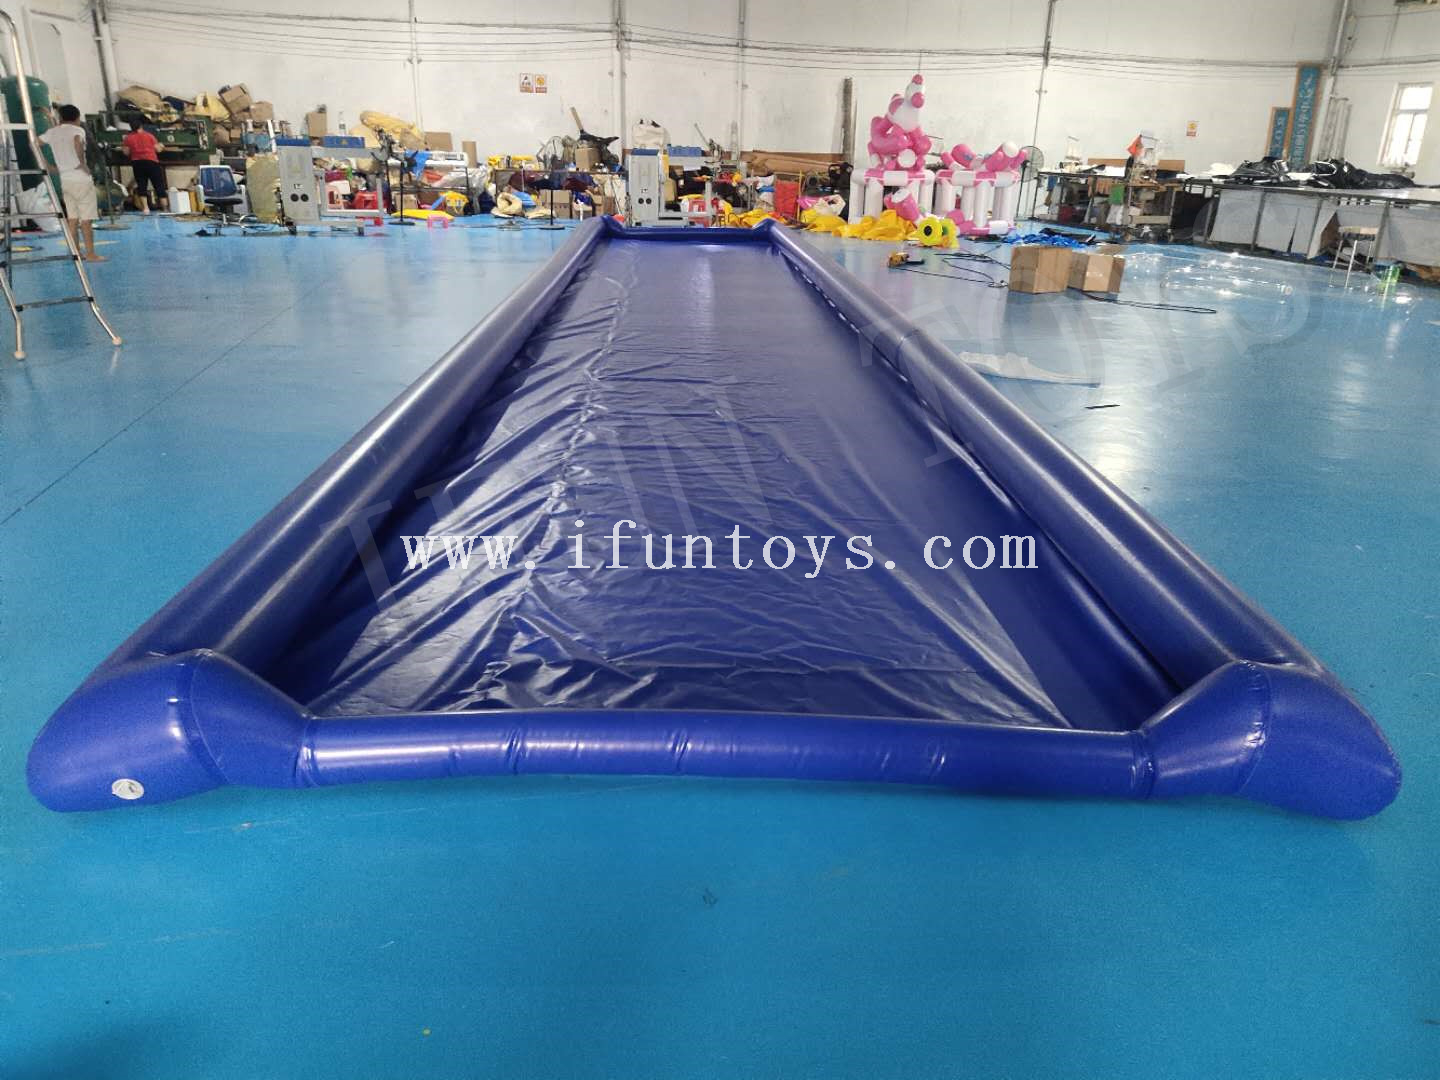 15m Long Inflatable Water Skimpool / Inflatable Pool for Skimboard Sports / Portable Inflatable Skimboard Pool